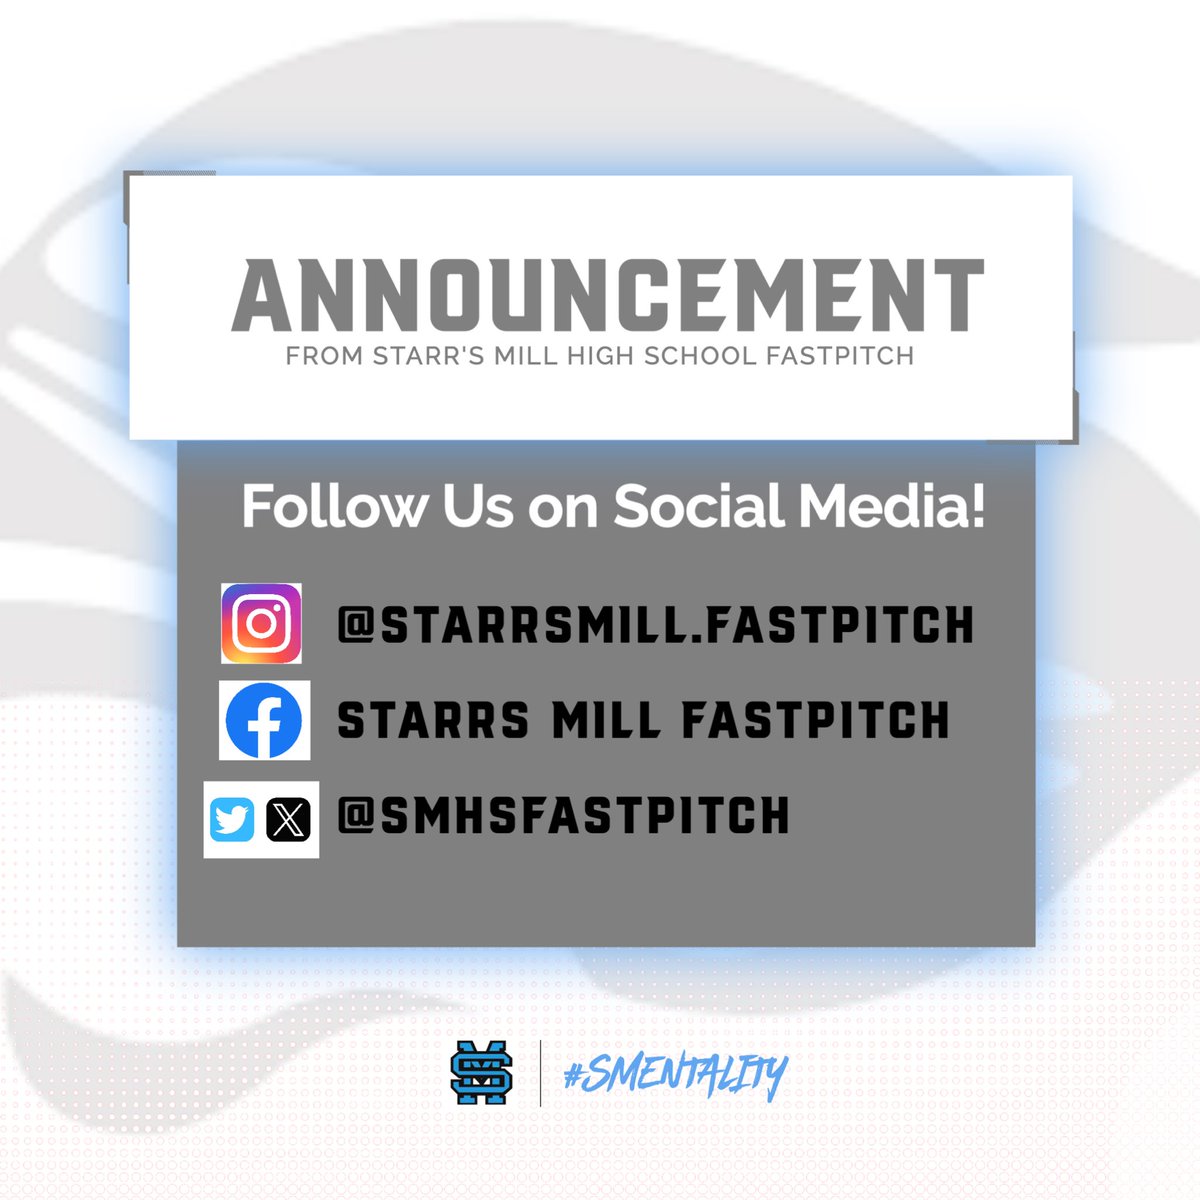 📲📸 FOLLOW US ON SOCIAL MEDIA 📸📲 Join us on ALL platforms to stay up-to-date on SMHS Fastpitch 🥎 #CLIMB #SMentality